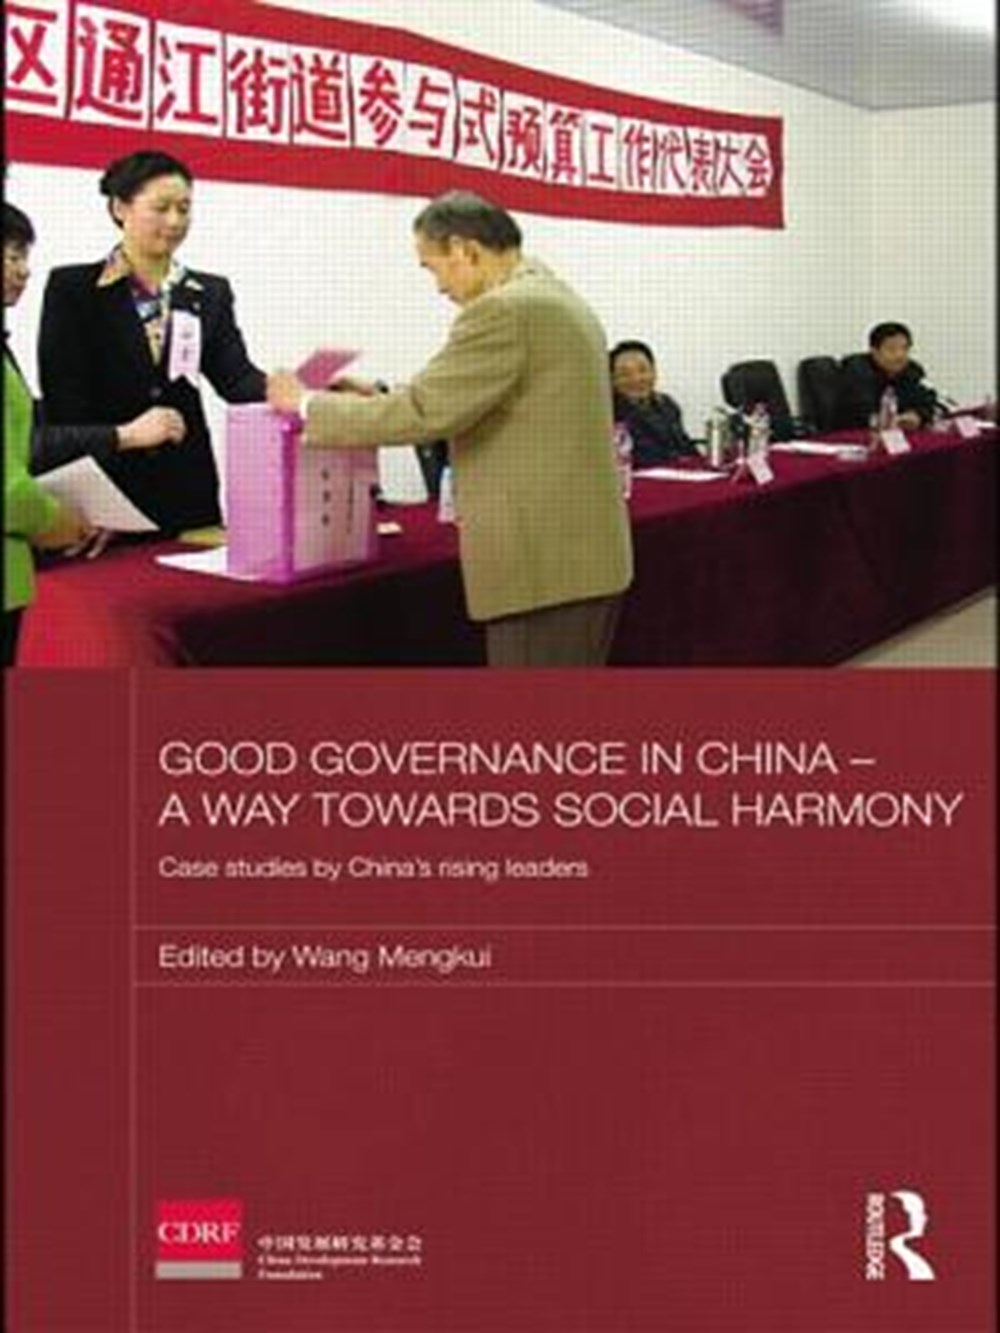 Good Governance in China - A Way Towards Social Harmony Case Studies by China's Rising Leaders